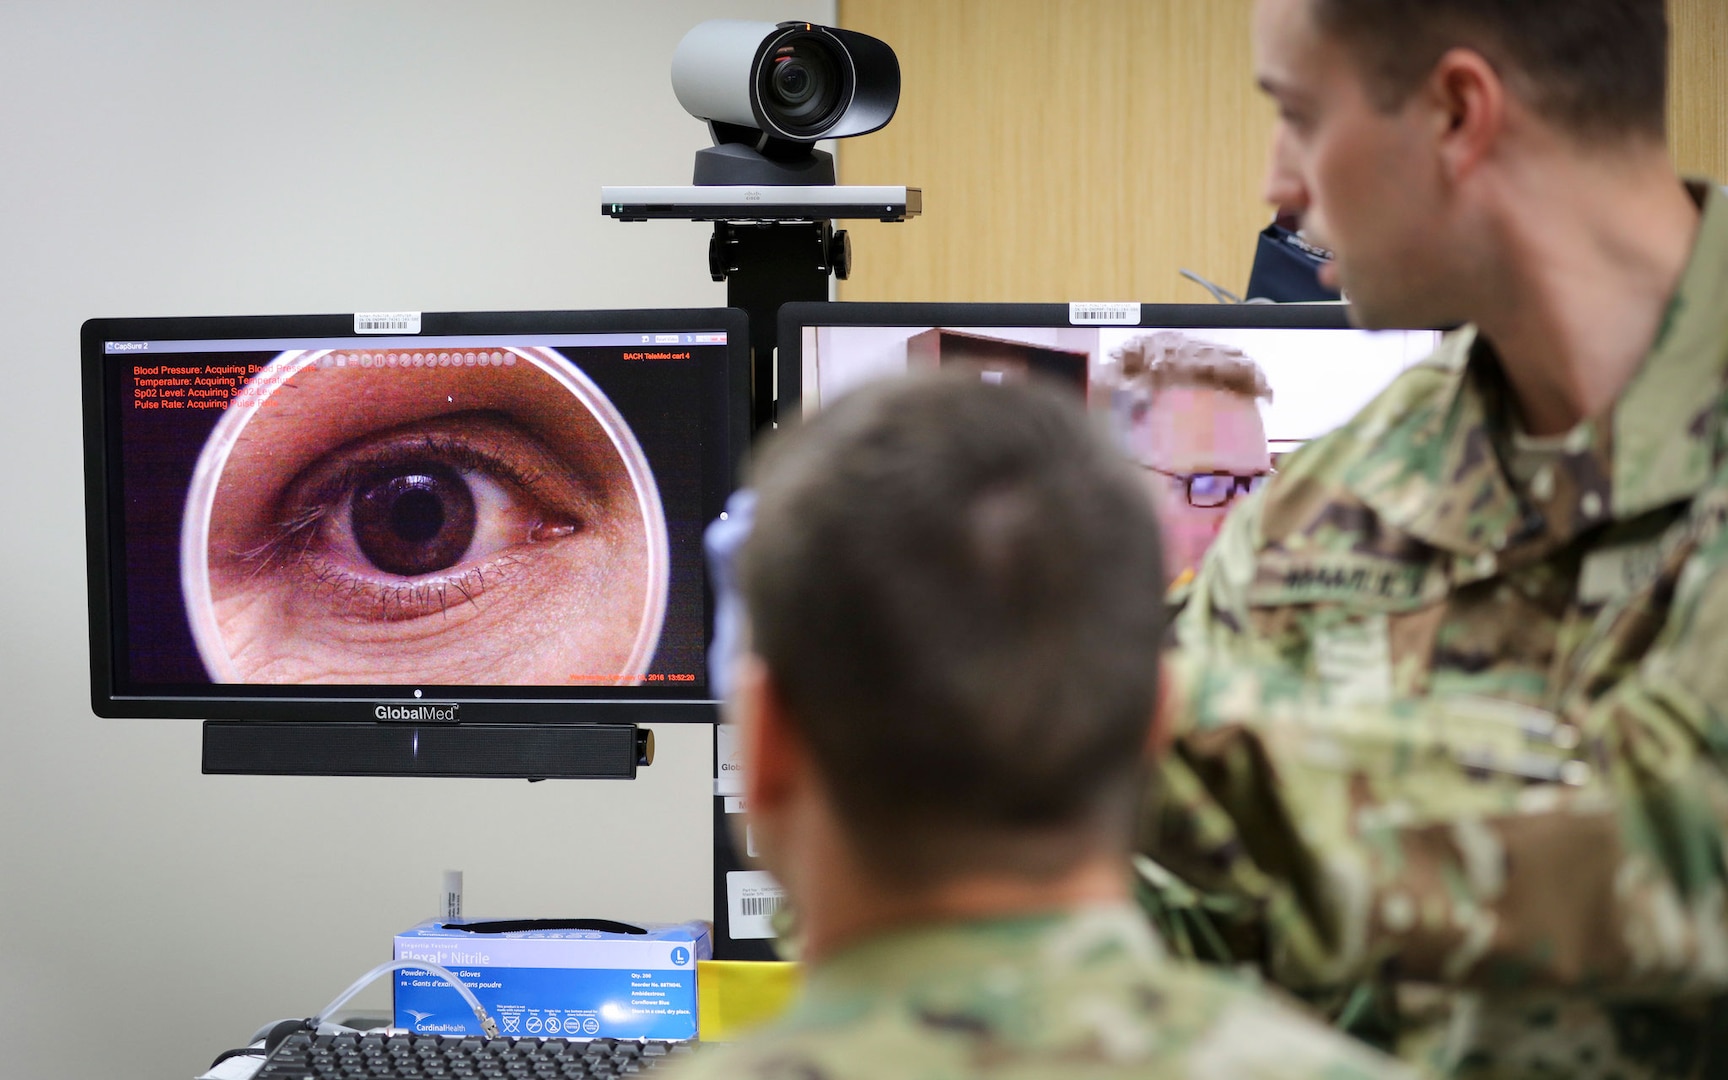 In a demonstration of the Telehealth process at Fort Campbell's Blanchfield Army Community Hospital, clinical staff nurse Lt. Maxx P. Mamula examines patient Master Sgt. Jason H. Alexander using a digital external ocular camera. The image is immediately available to Lt. Col. Kevin A. Horde, a provider at Fort Gordon's Eisenhower Medical Center, offering remote consultation.